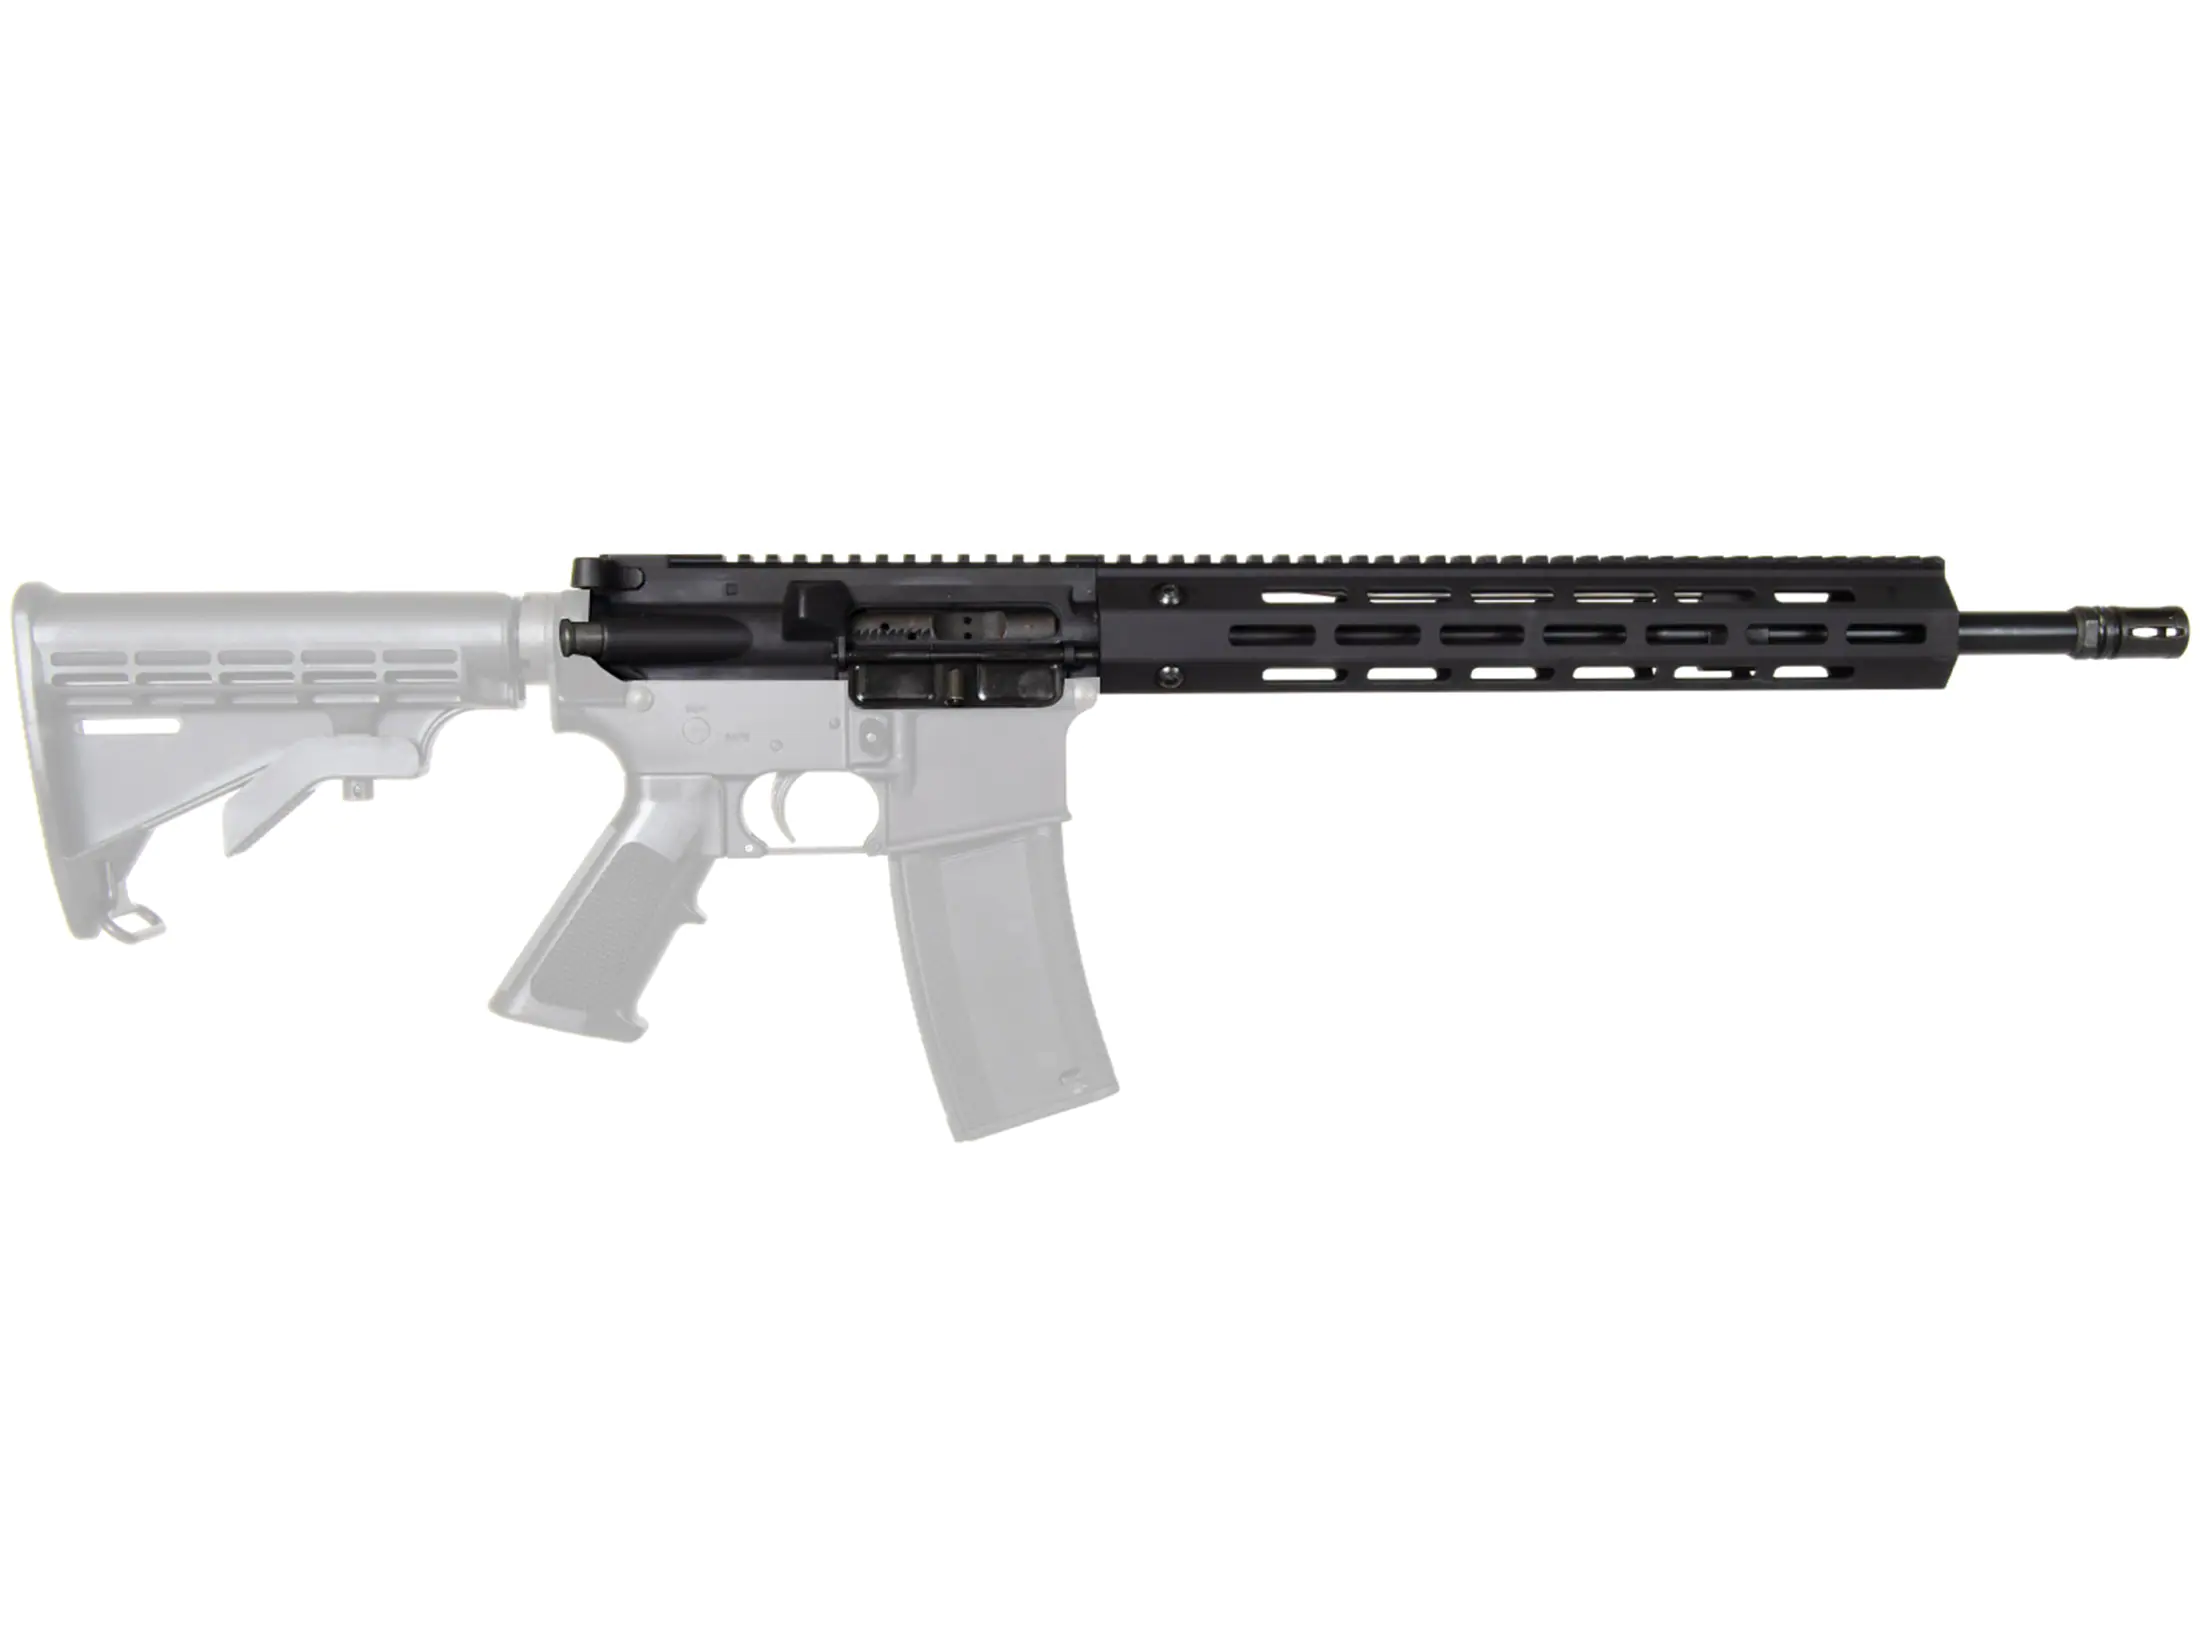 Troy Industries AR-15 A3 Upper Receiver Assembly 5.56x45mm NATO 16" Barrel with 13" M-Lok Handguard - $411.08